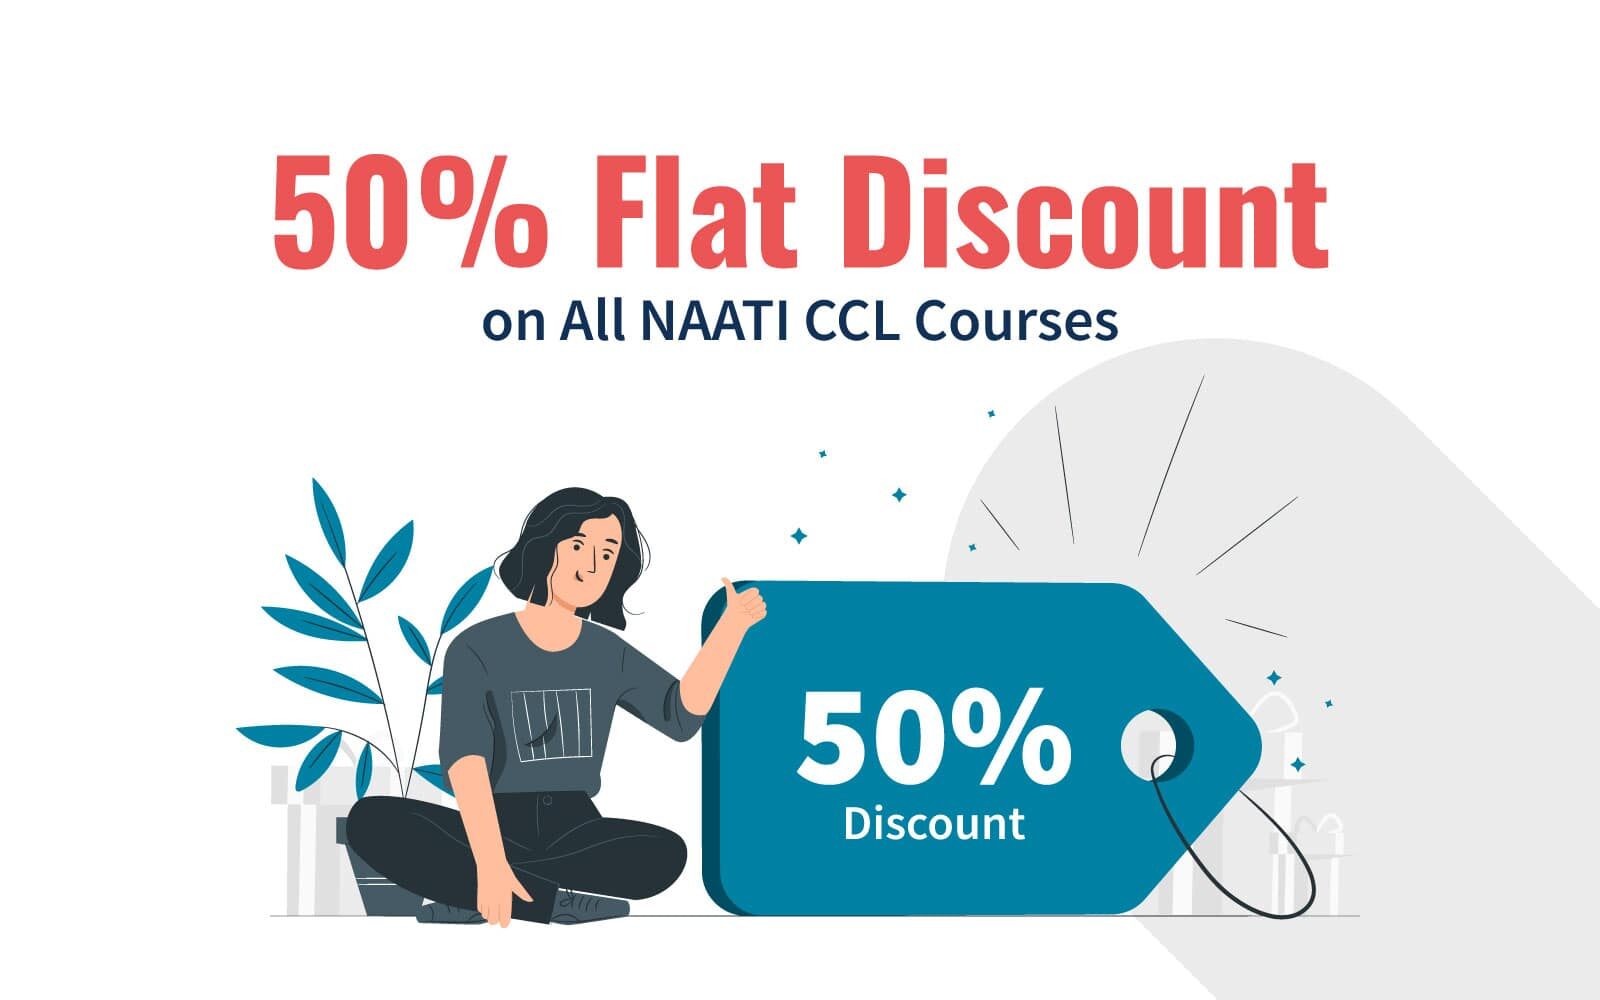 Flat 50% Discount on NAATI CCL Courses